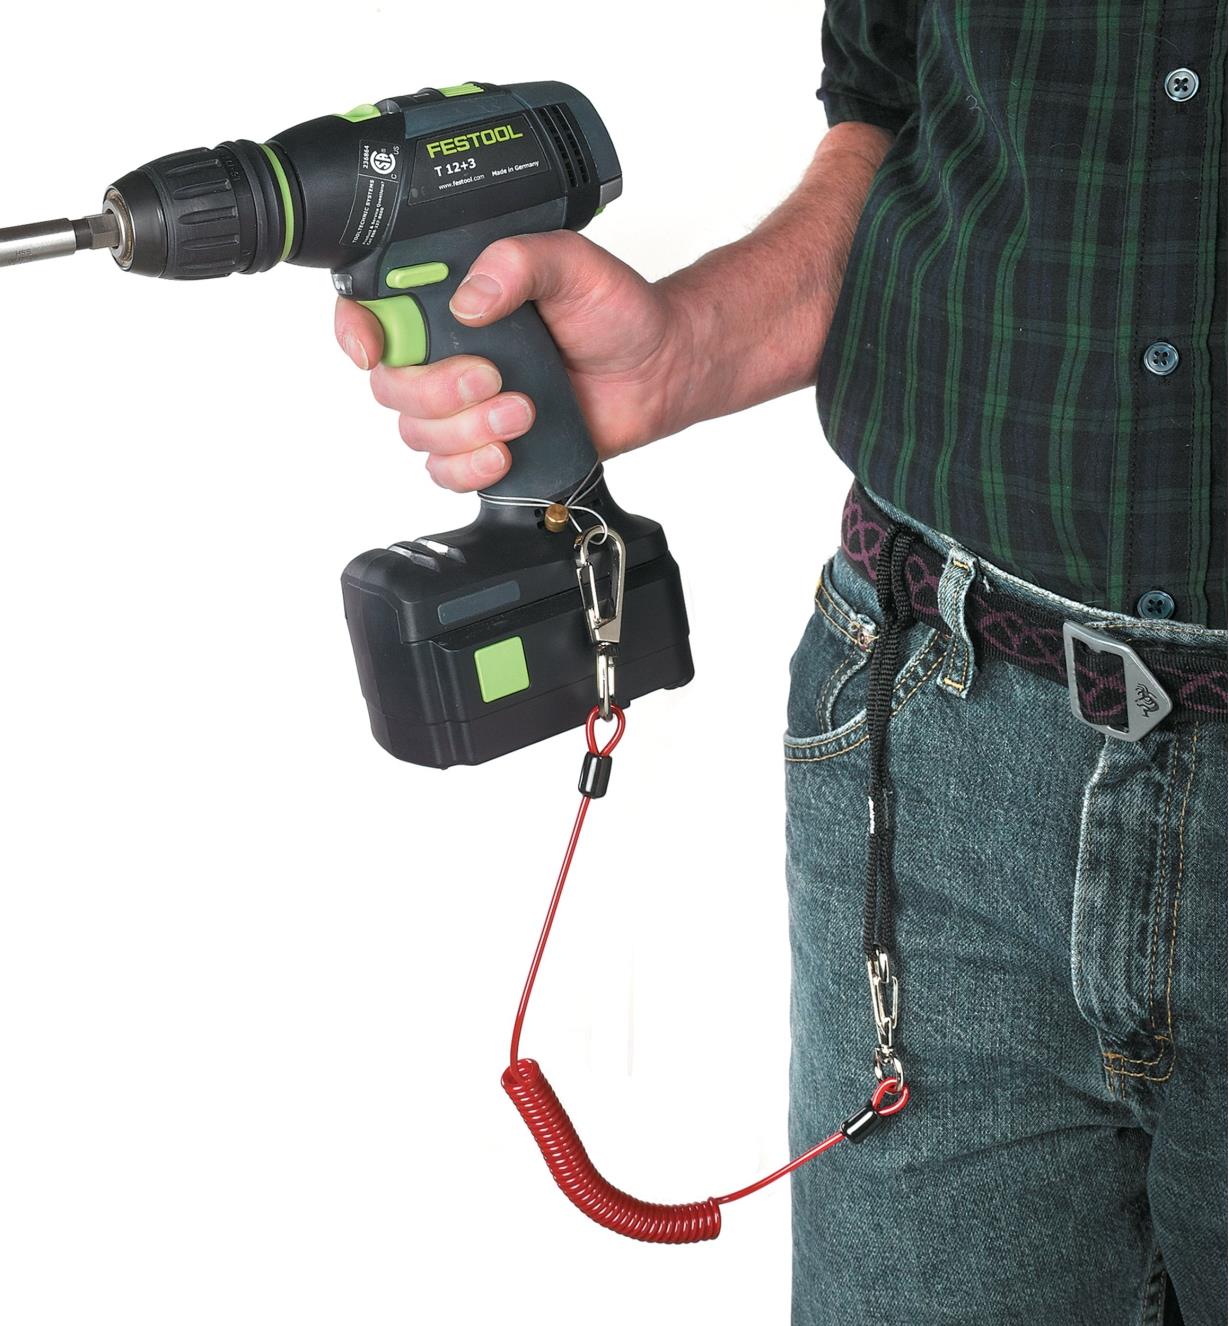 A person holding a cordless drill that is connected to their belt by a tool safety tether